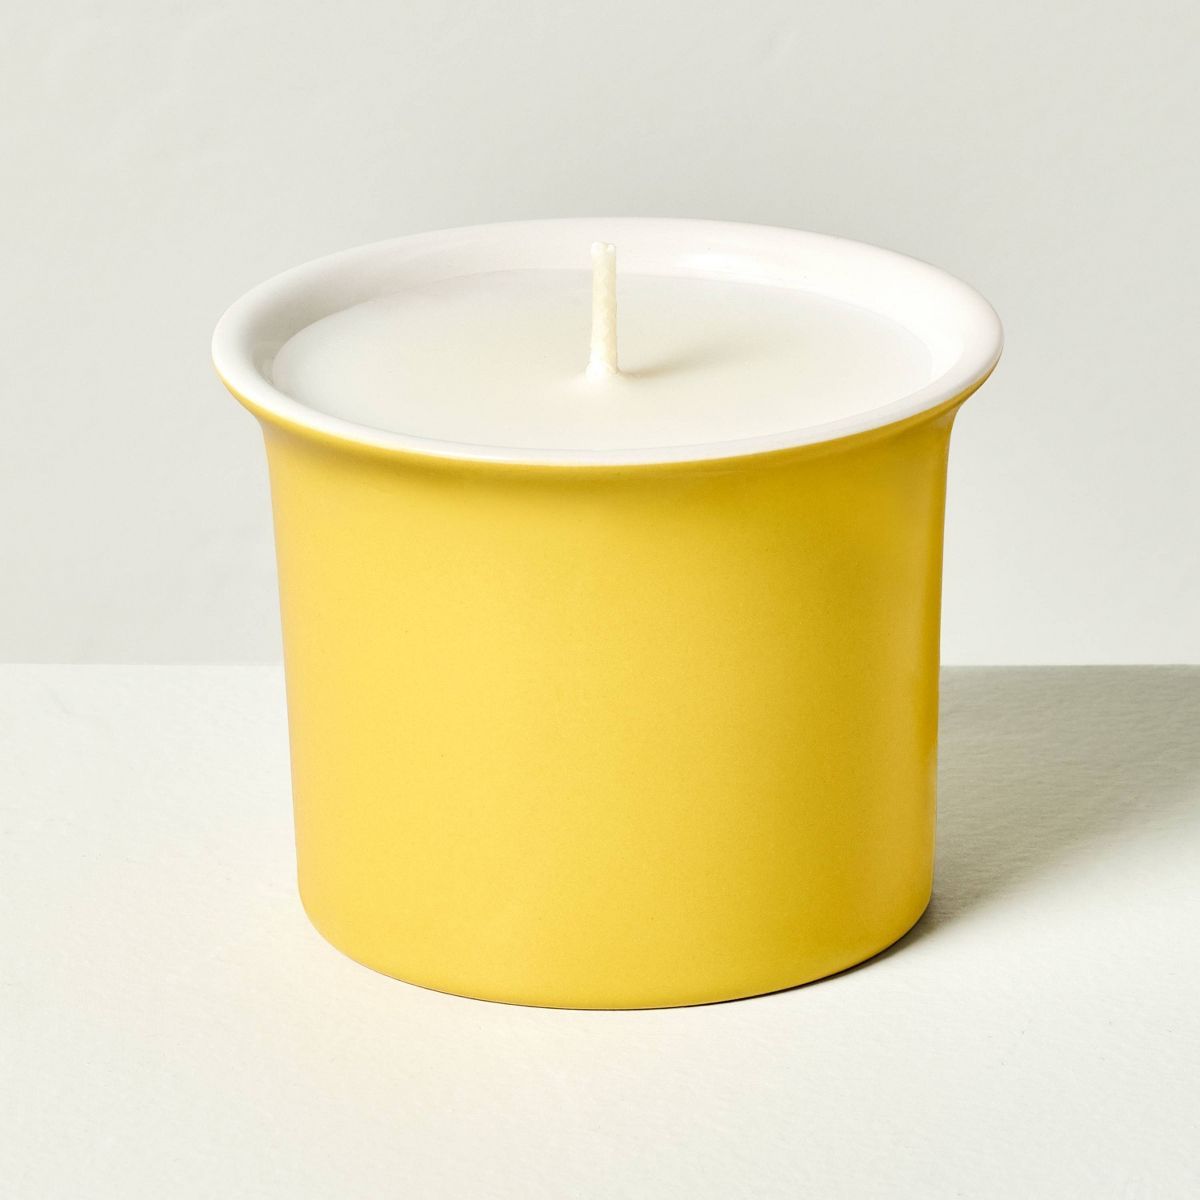 Two-Tone Ceramic Golden Hour Jar Candle Yellow/Cream - Hearth & Hand™ with Magnolia | Target